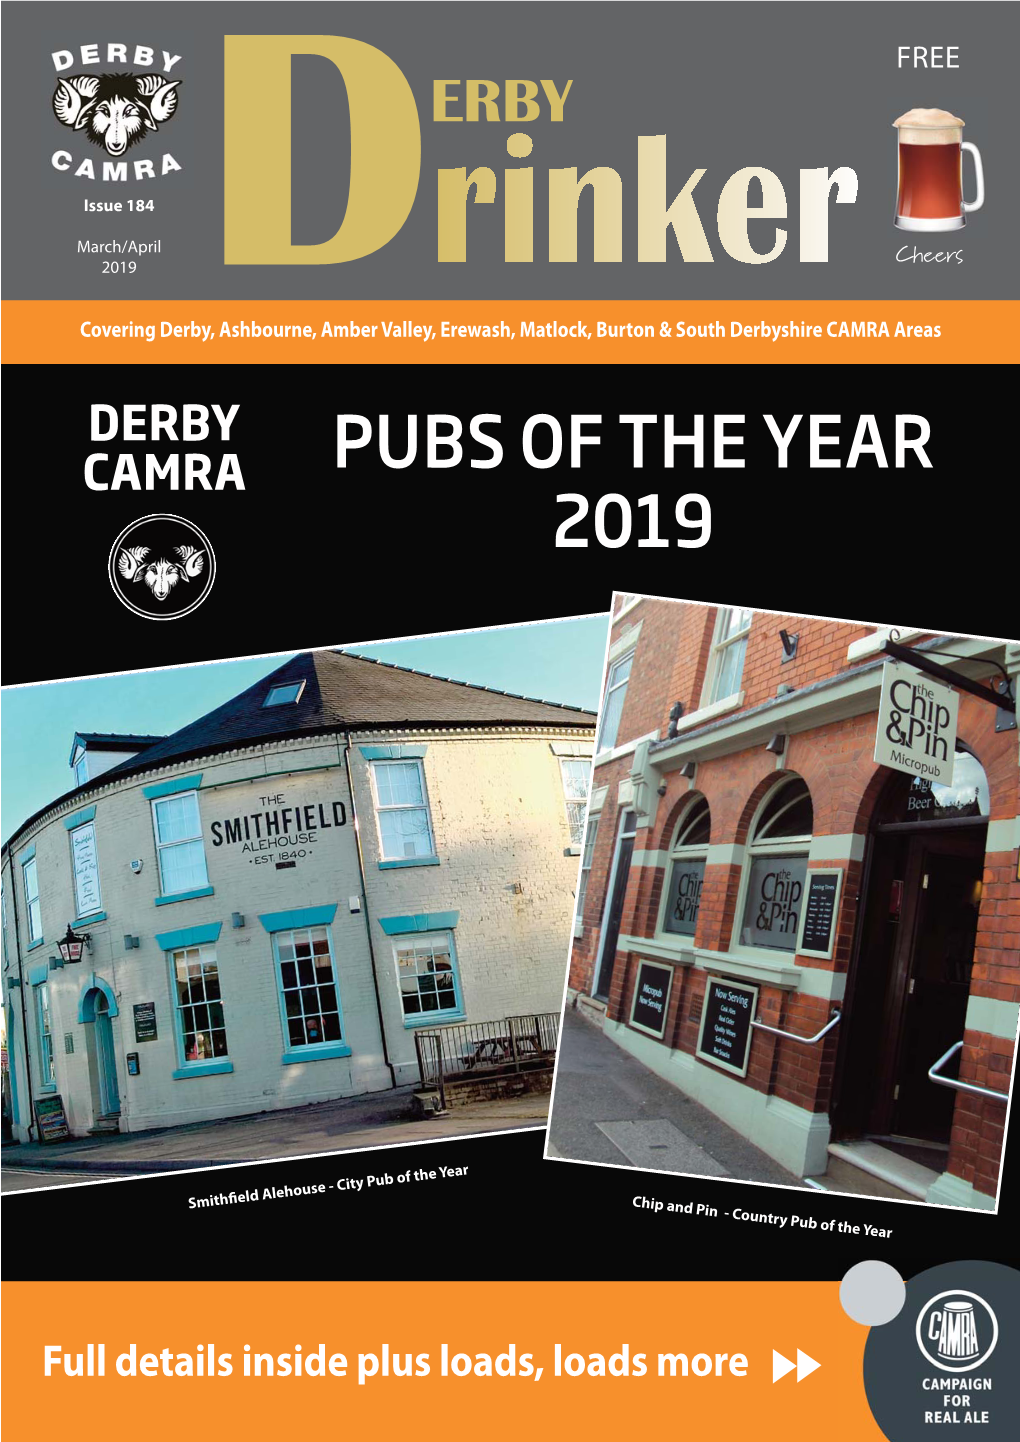 Pubs of the Year 2019